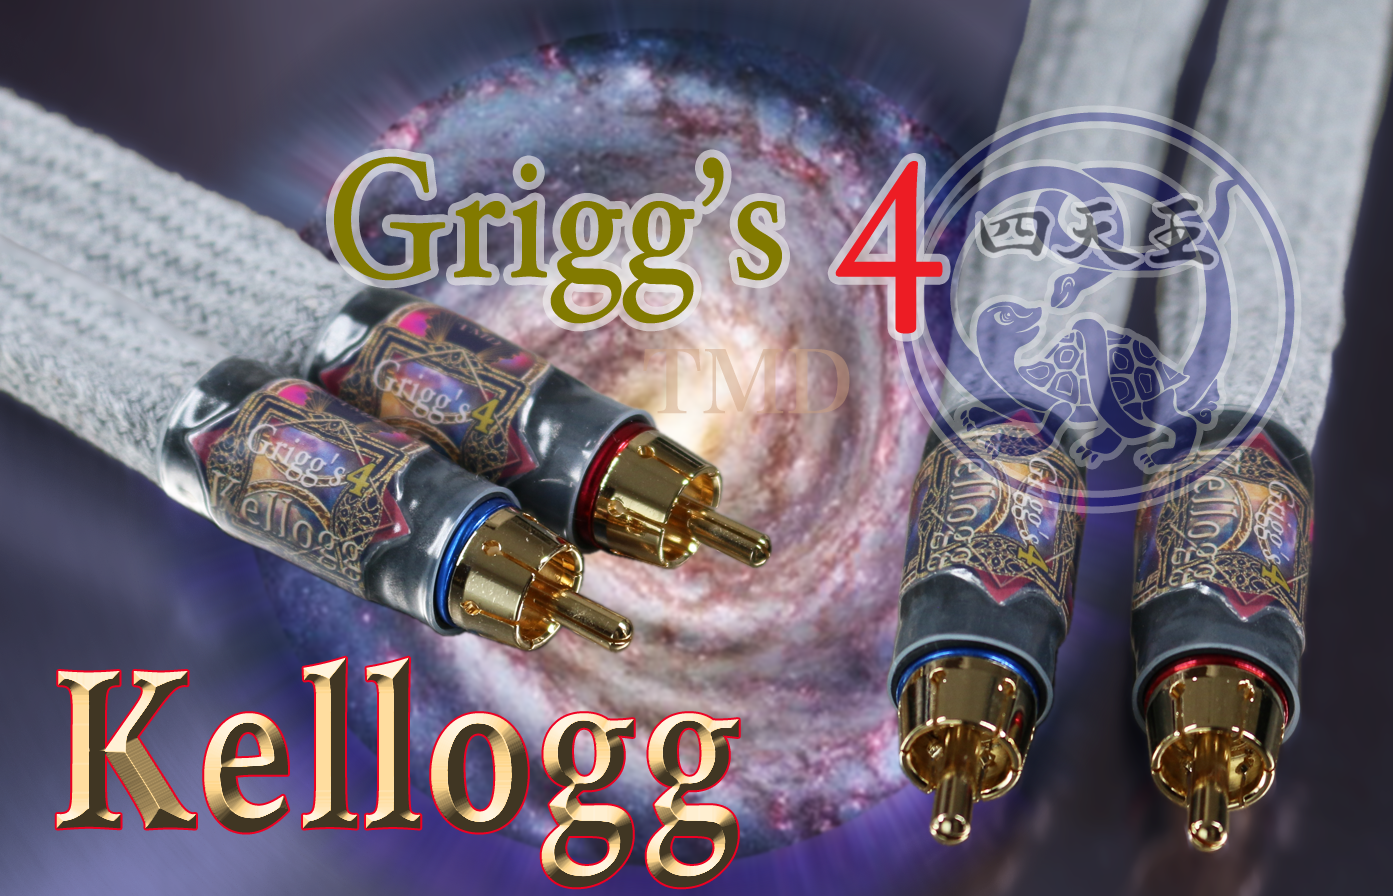 Grigg's 4 Kellogg（1m pair）FINAL CABLE 画像